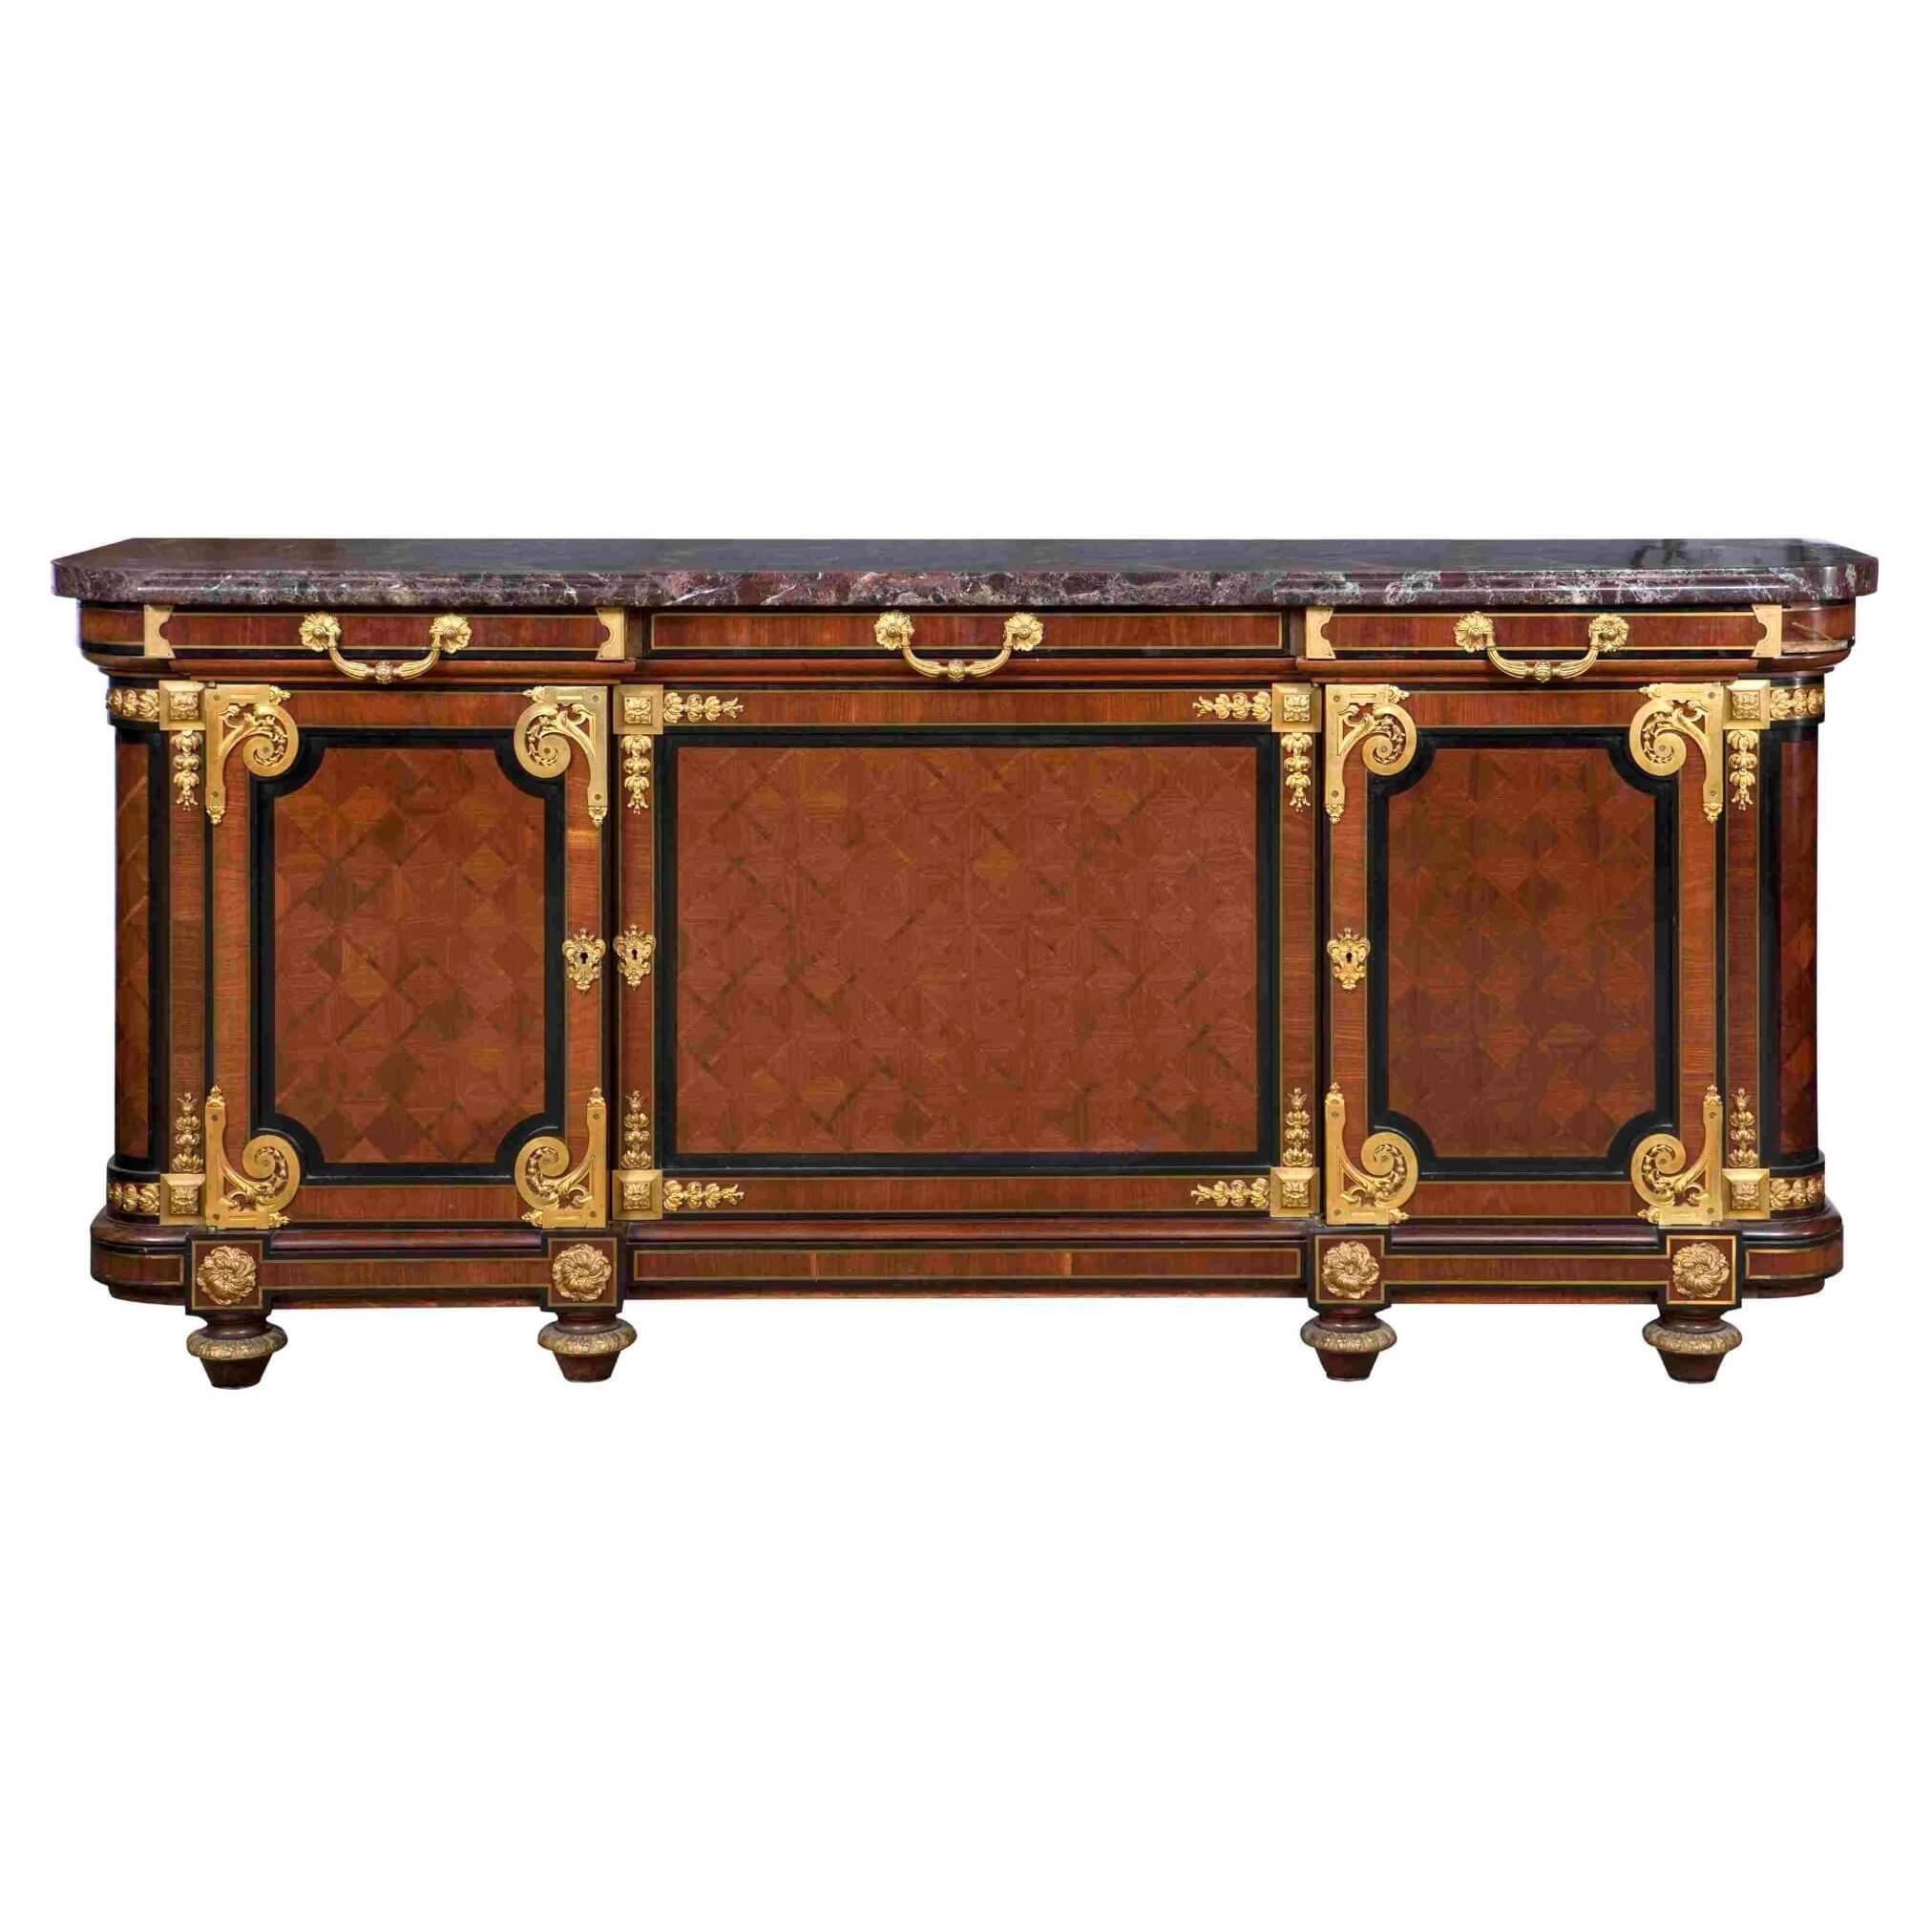 Antique Louis XVI Style Mahogany, Ormolu and Marble Cabinet by Mercier Frères For Sale